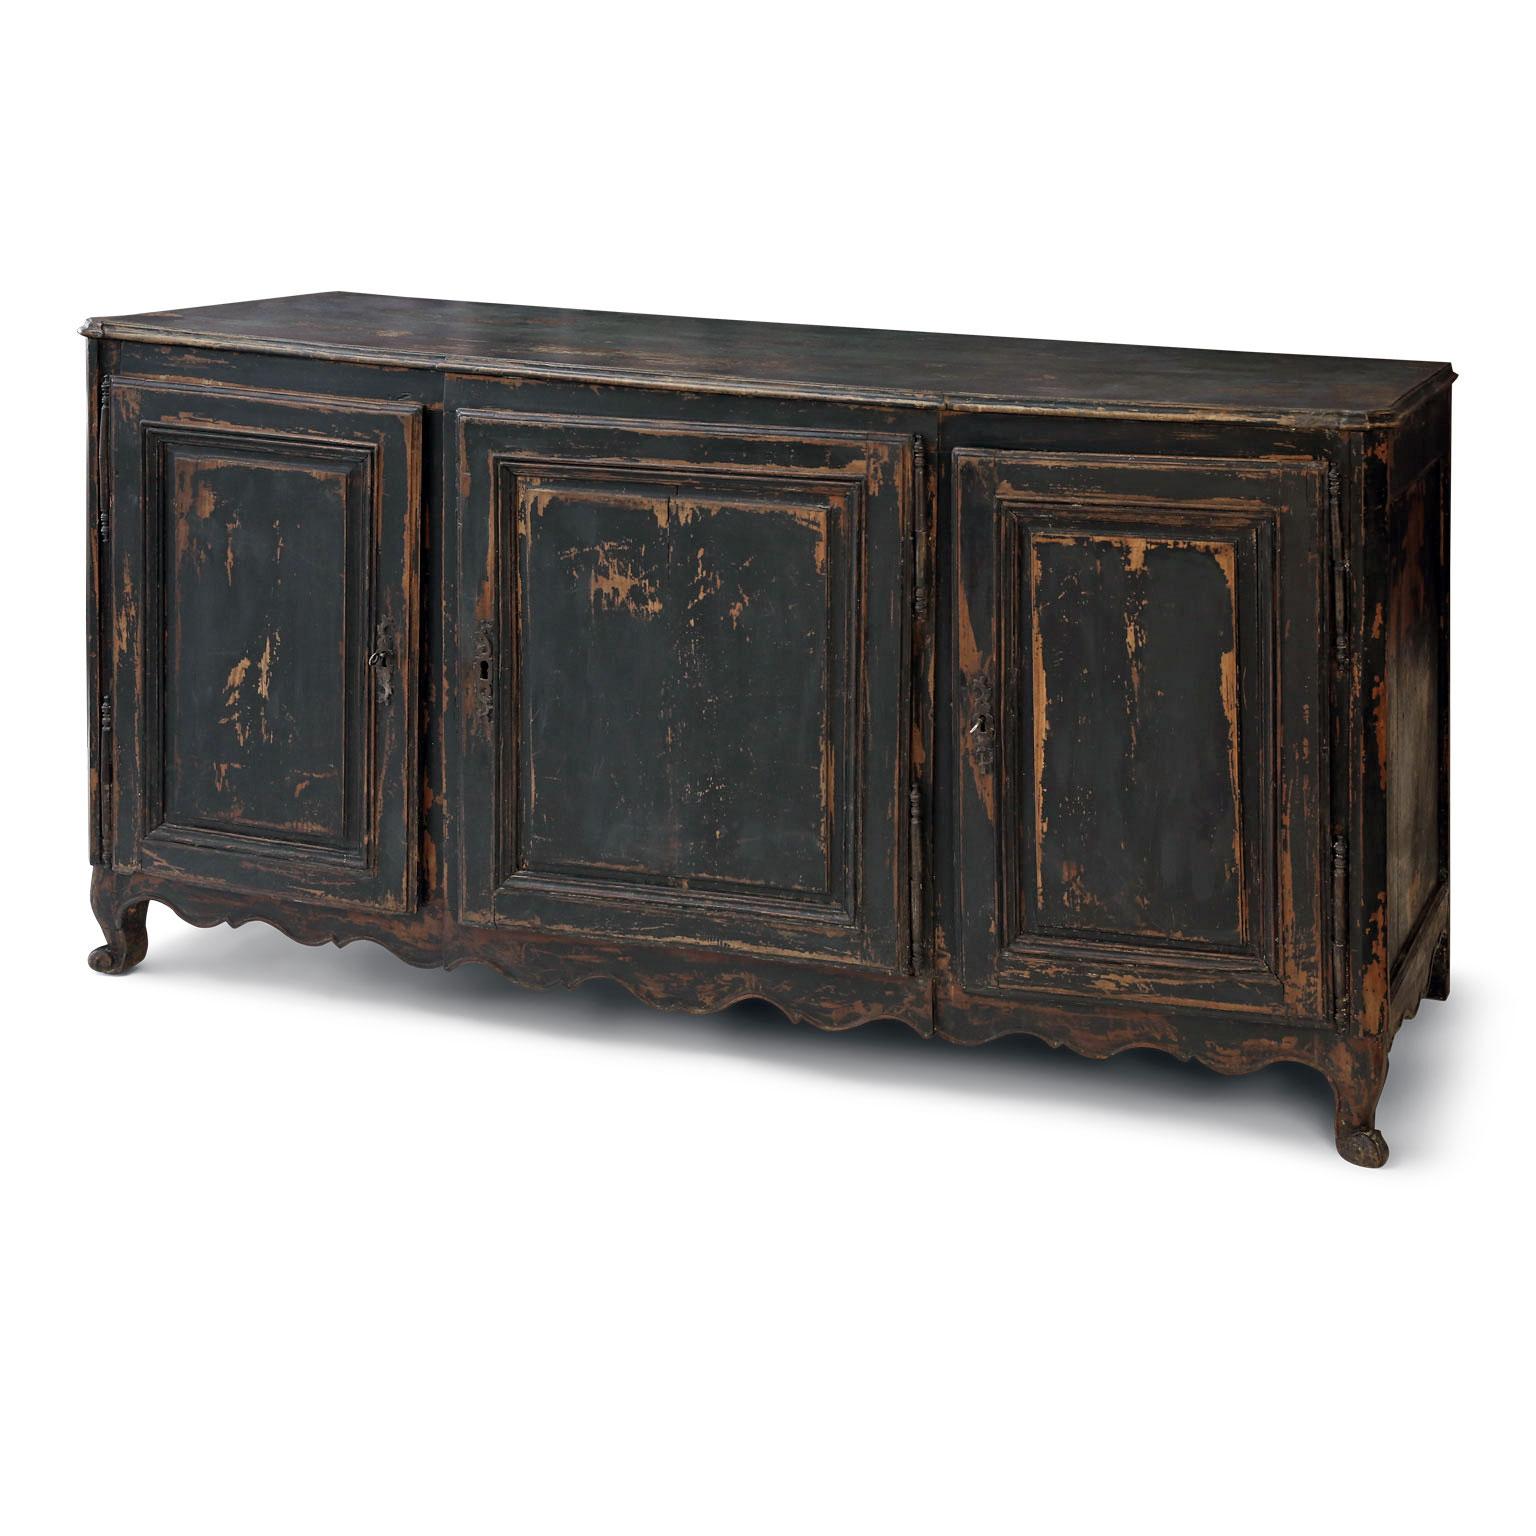 Large enfilade painted in black with dark blue undertones and hand carved in French walnut. Transitional Louis XVI-XVI style body raised upon cabriole legs with scalloped lower apron. Two doors conceal interior storage with one shelf and two half